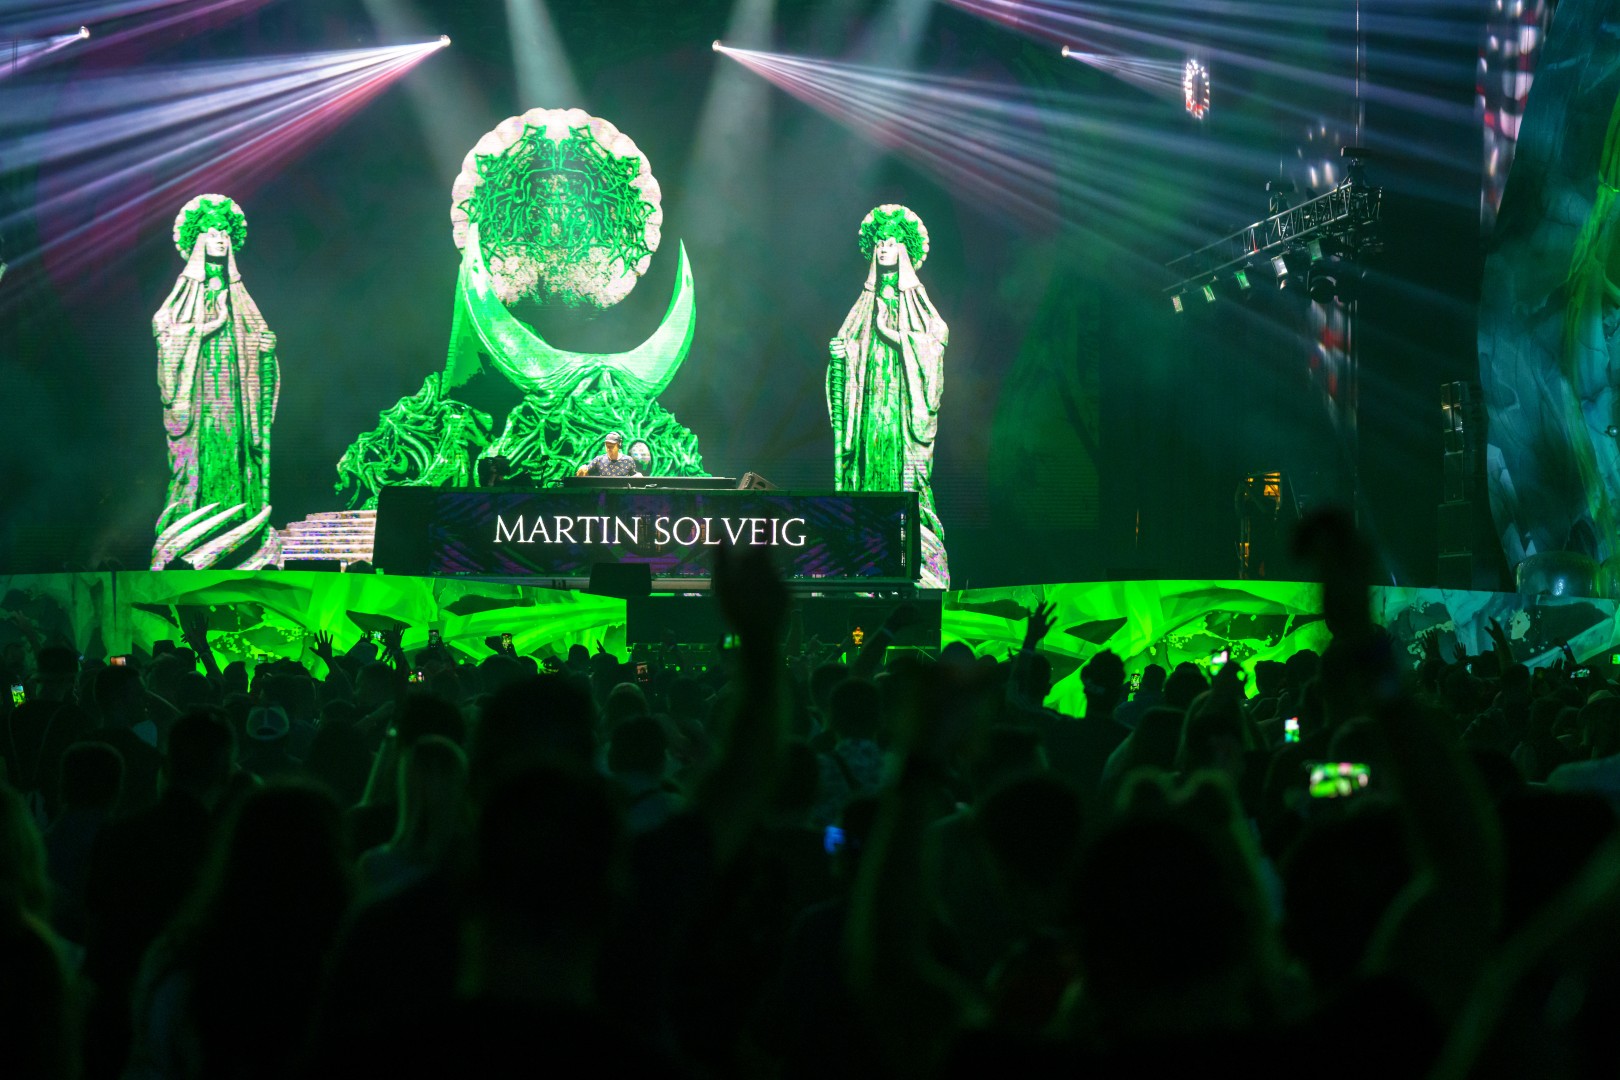 Martin Solveig at Cluj Arena in Cluj-Napoca on September 12, 2021 (91a9ef0f9f)